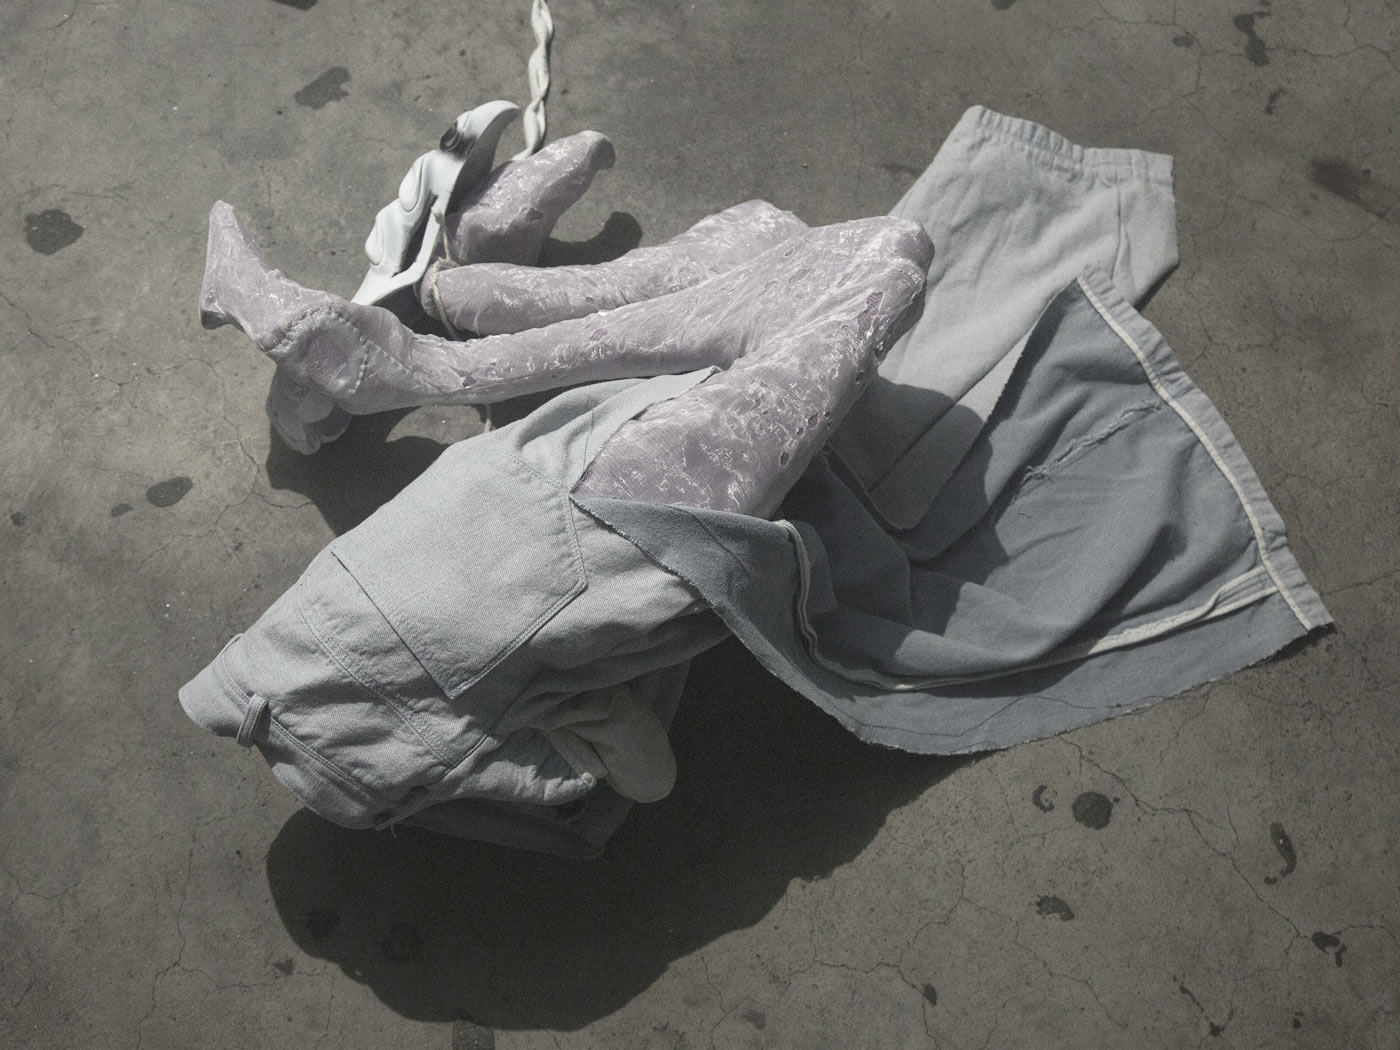 A crouched lower body. The trousers are torn along the center back, exposing the legs. The legs are cramped and made of perforated laserscrim material.